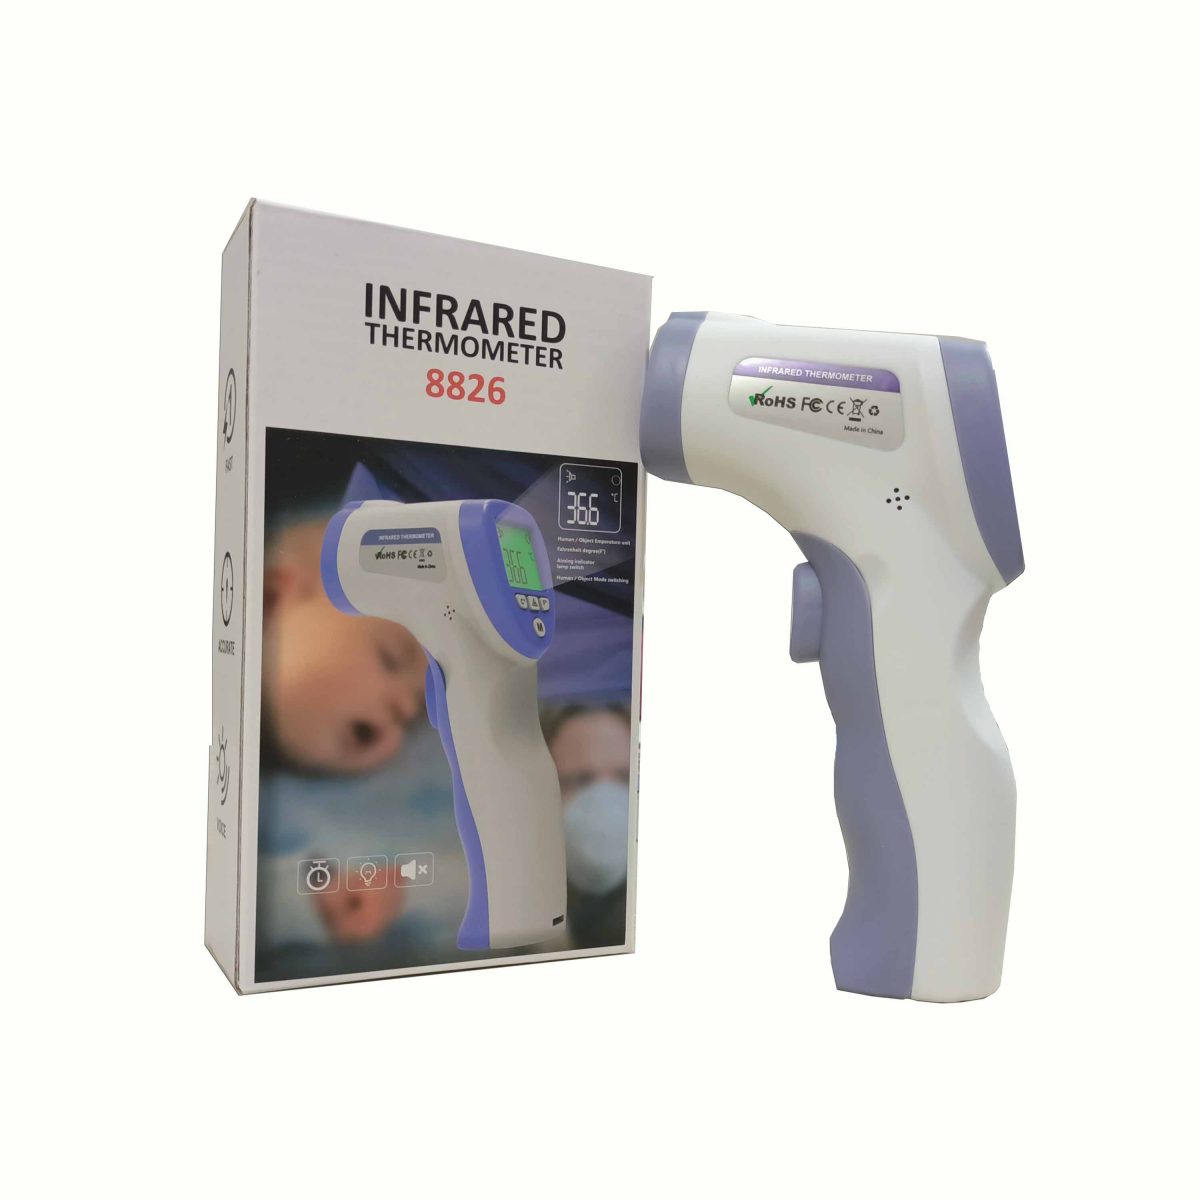 Infrared Digital thermometer 8826